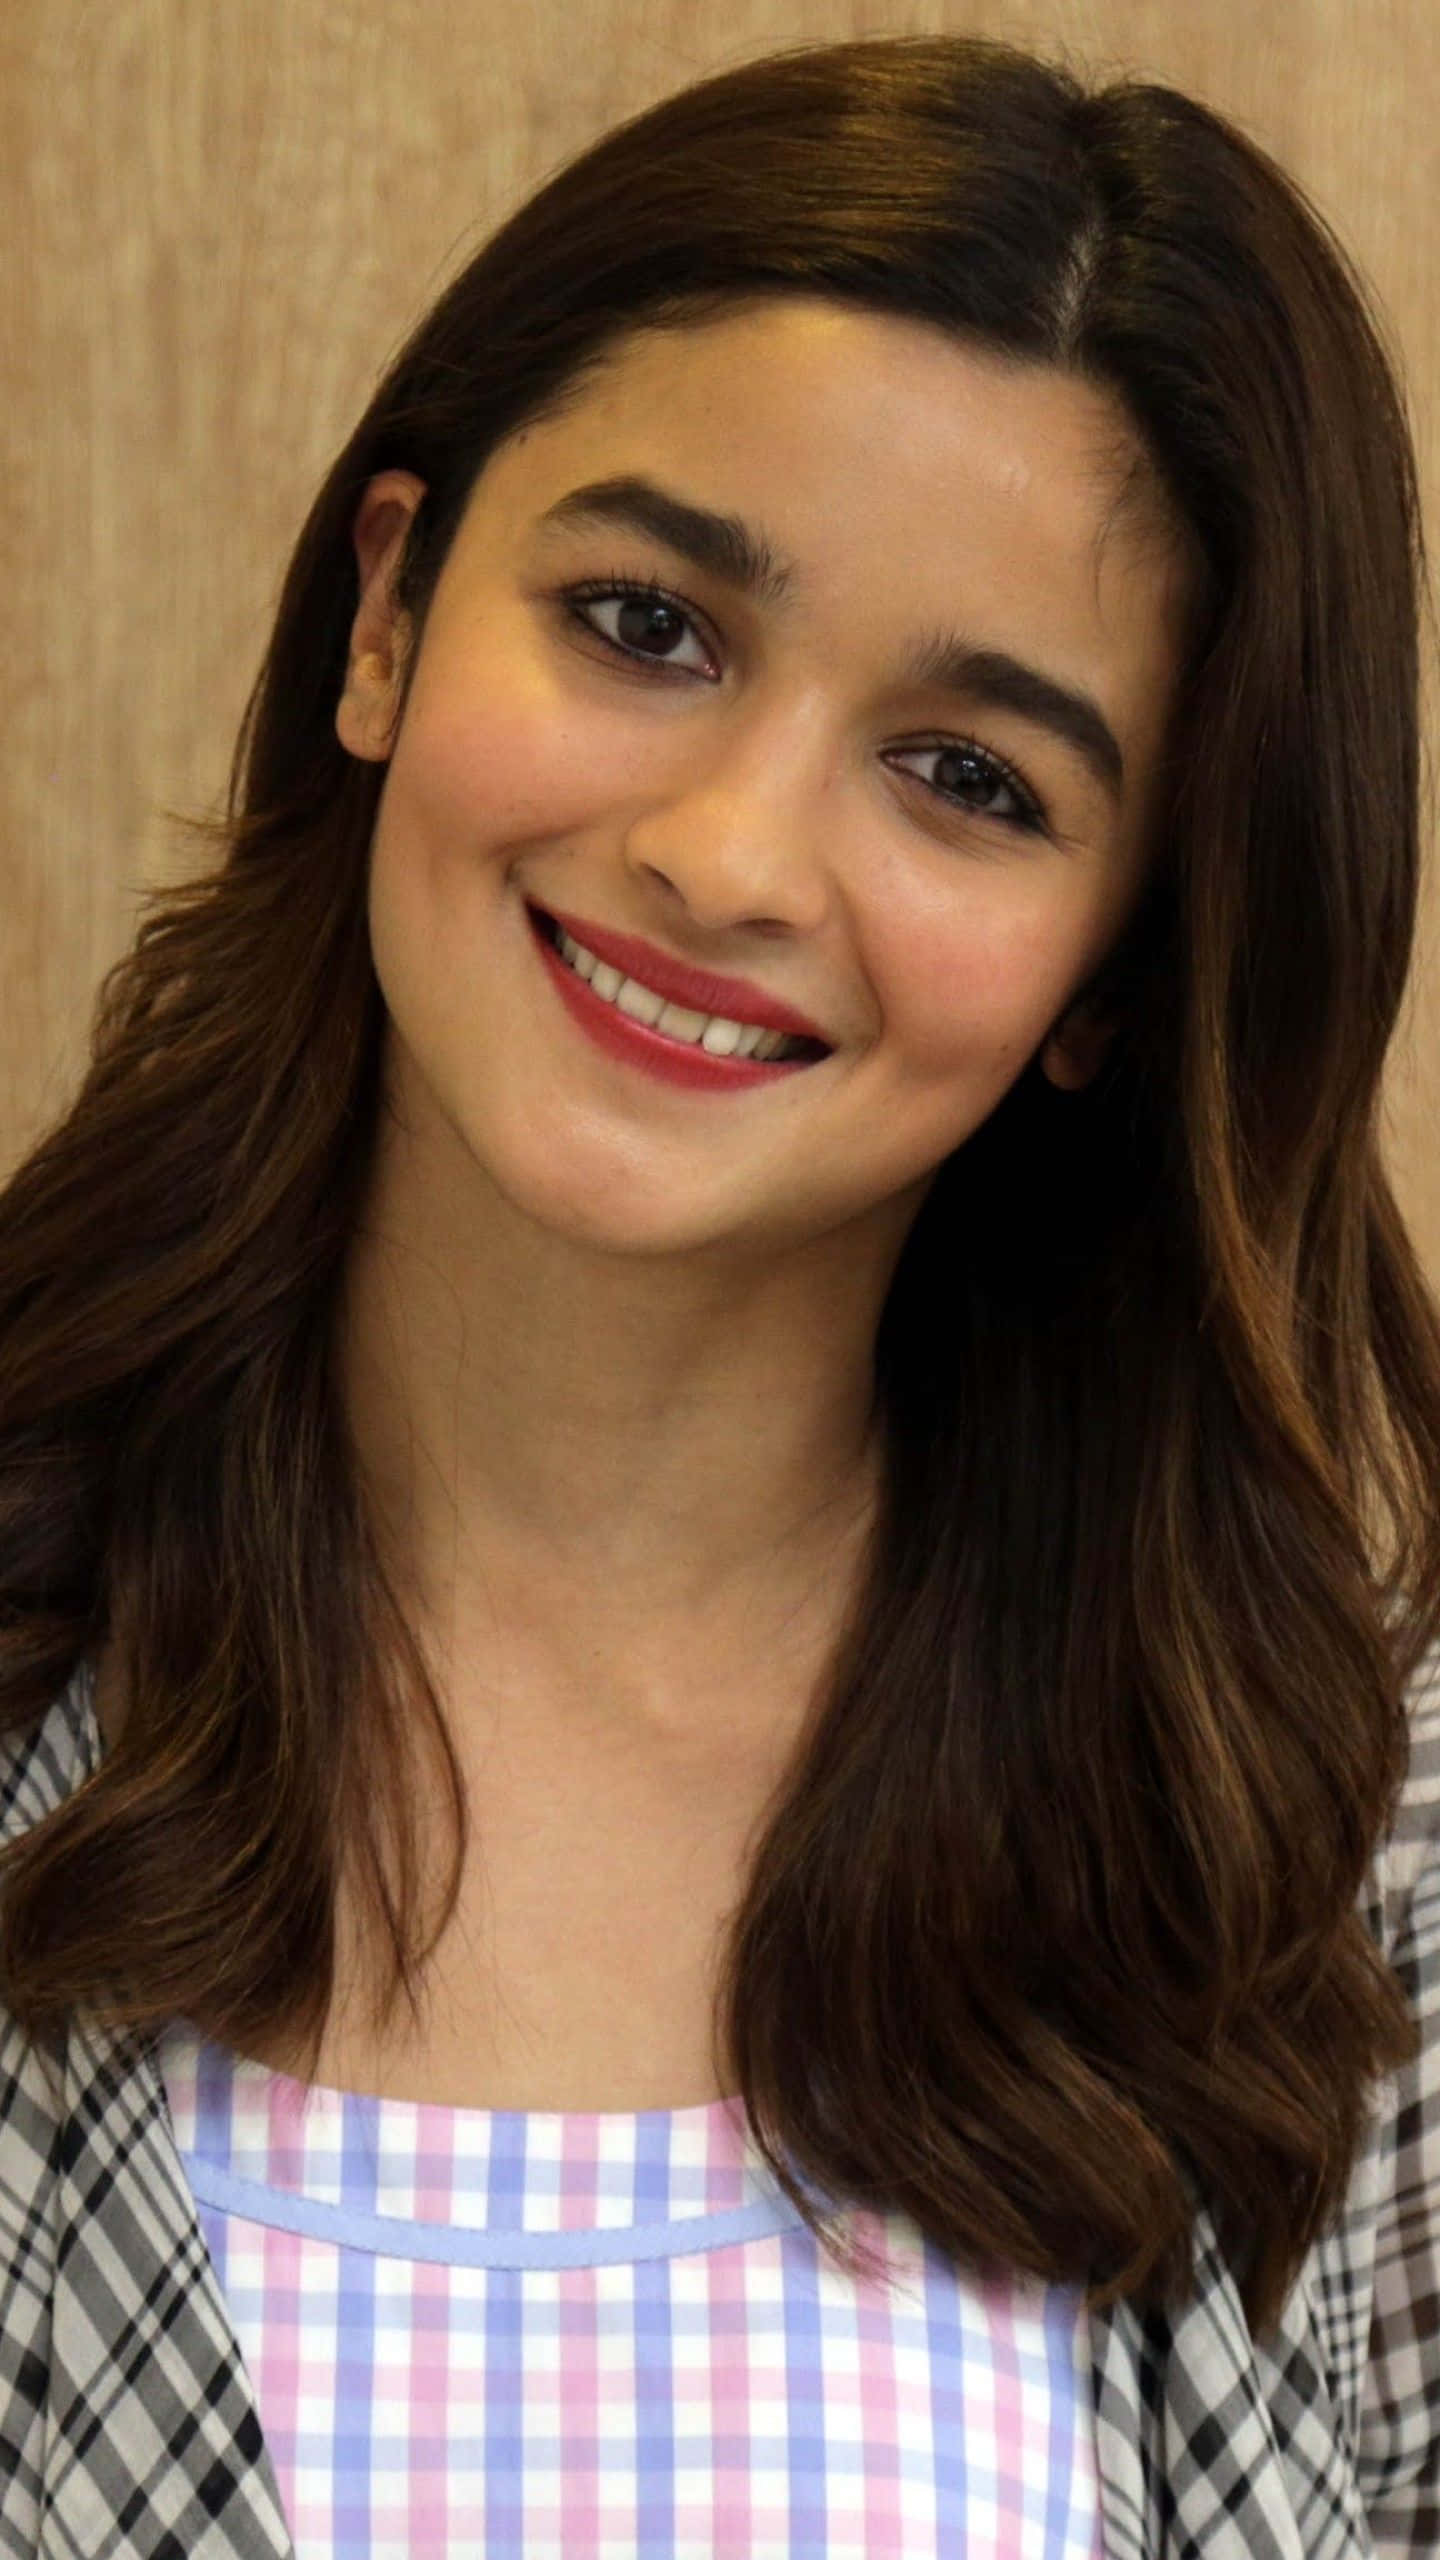 Alia Bhatt looks beautiful in her natural expressions.